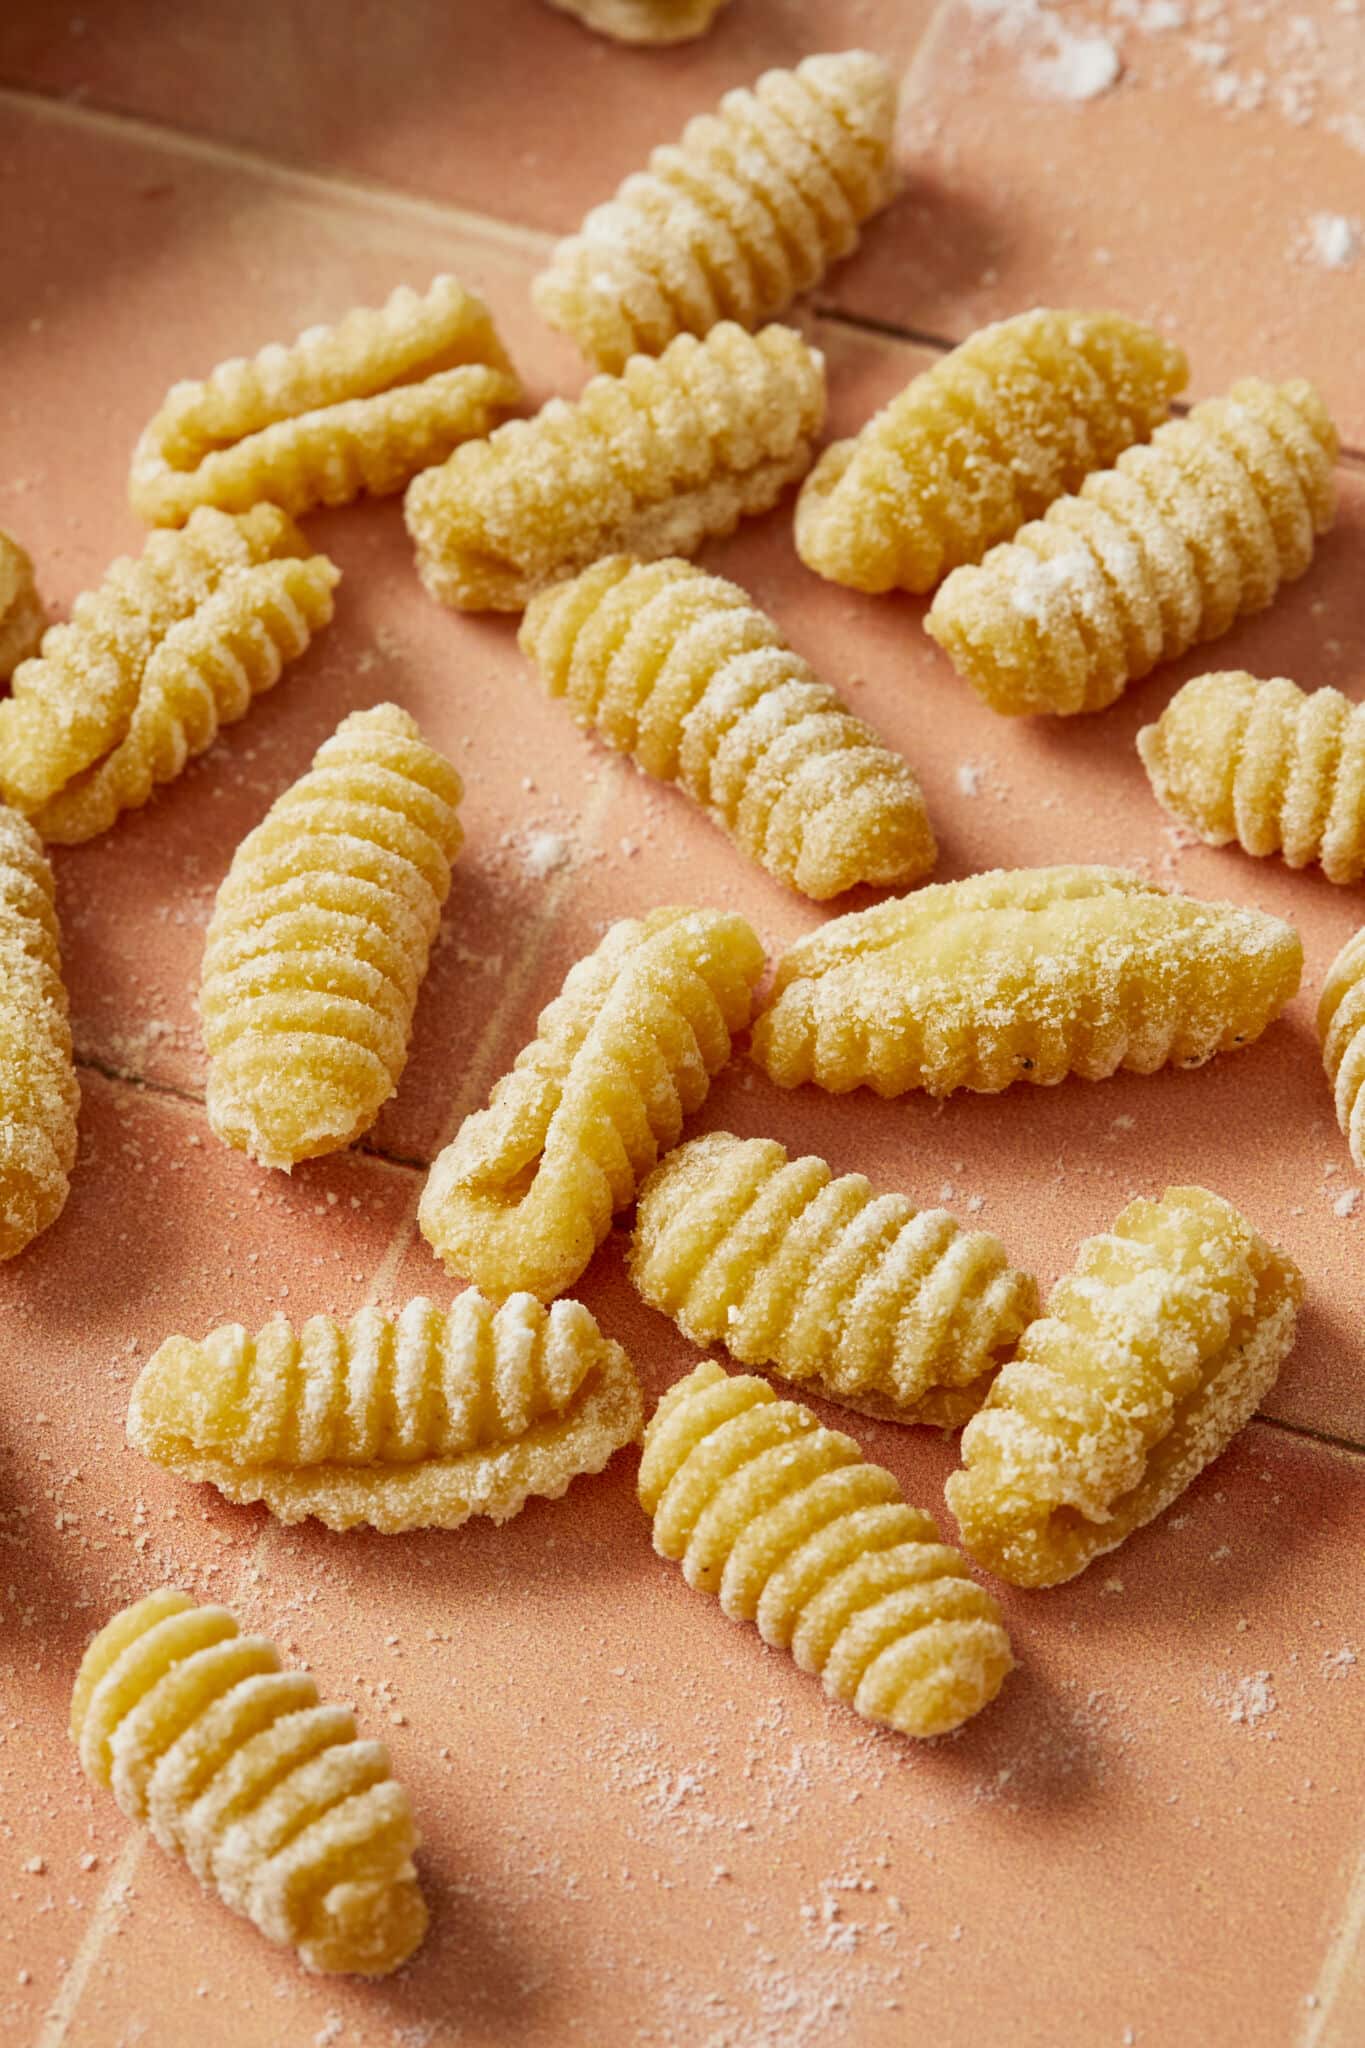 Malloreddus Pasta are shaped into small, elongated shells with a slightly curved shape with ridges on the outer surface.